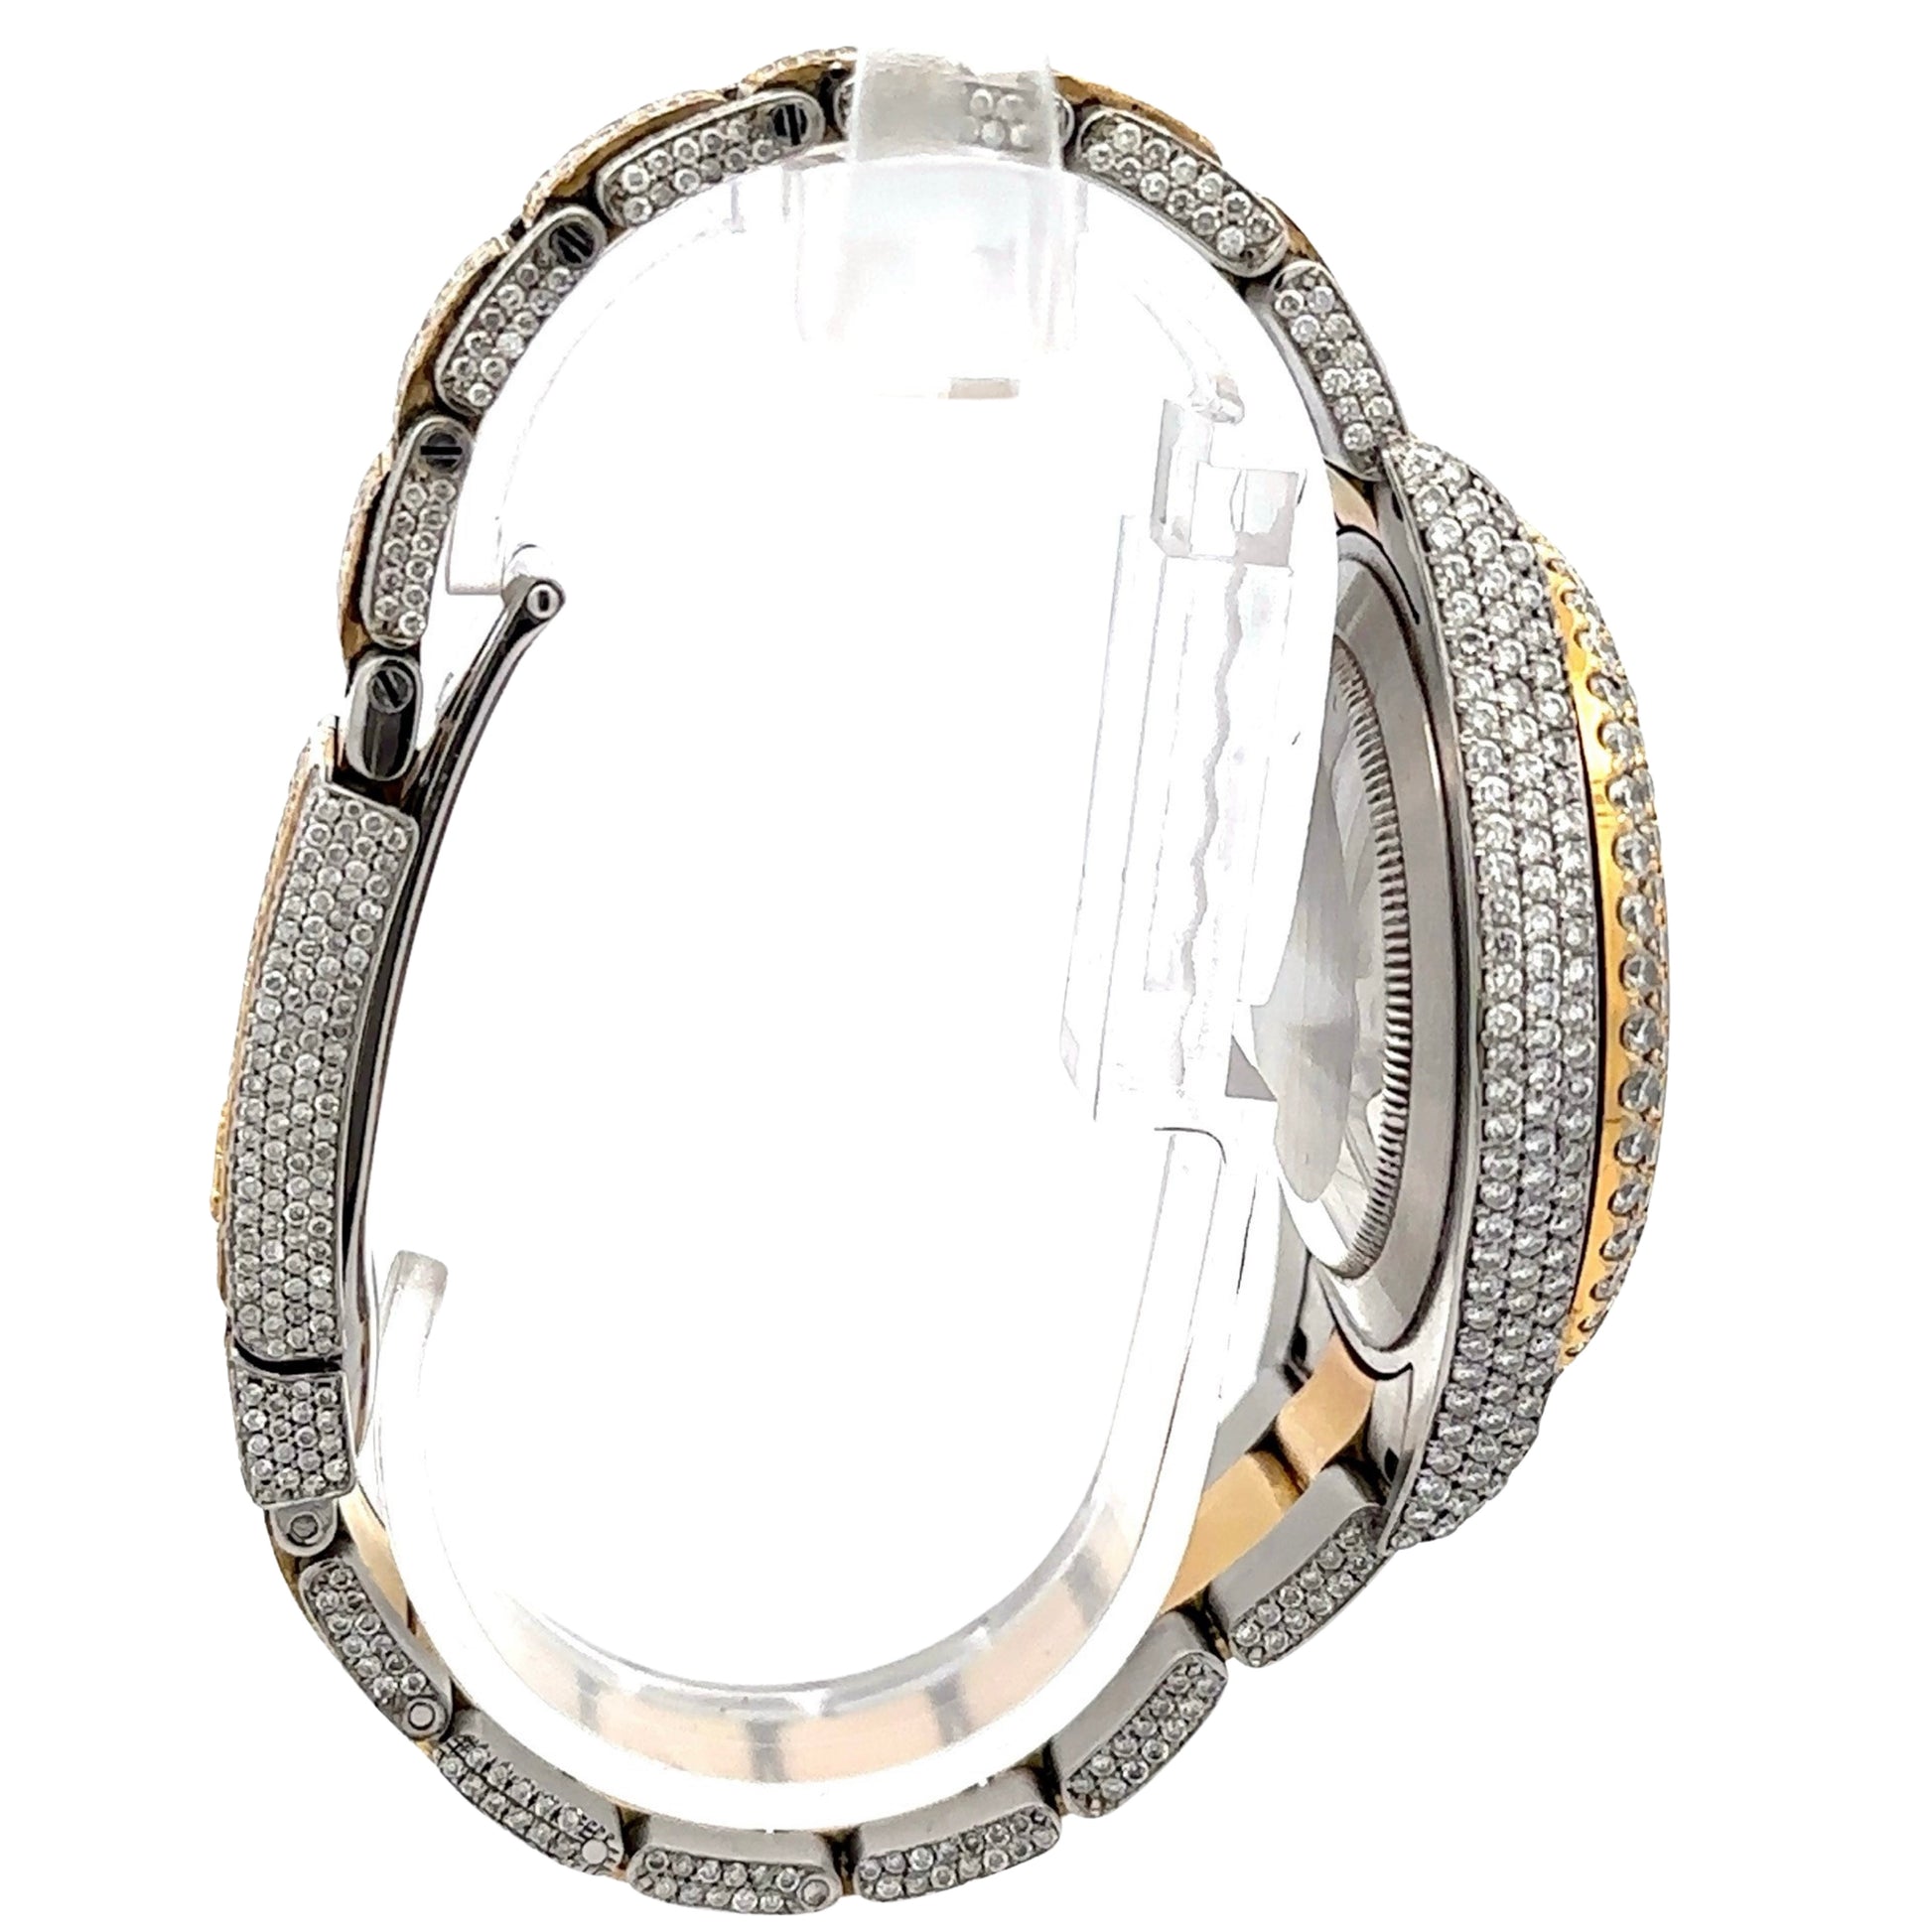 Side of watch with diamonds on side of clasp, band, and case.